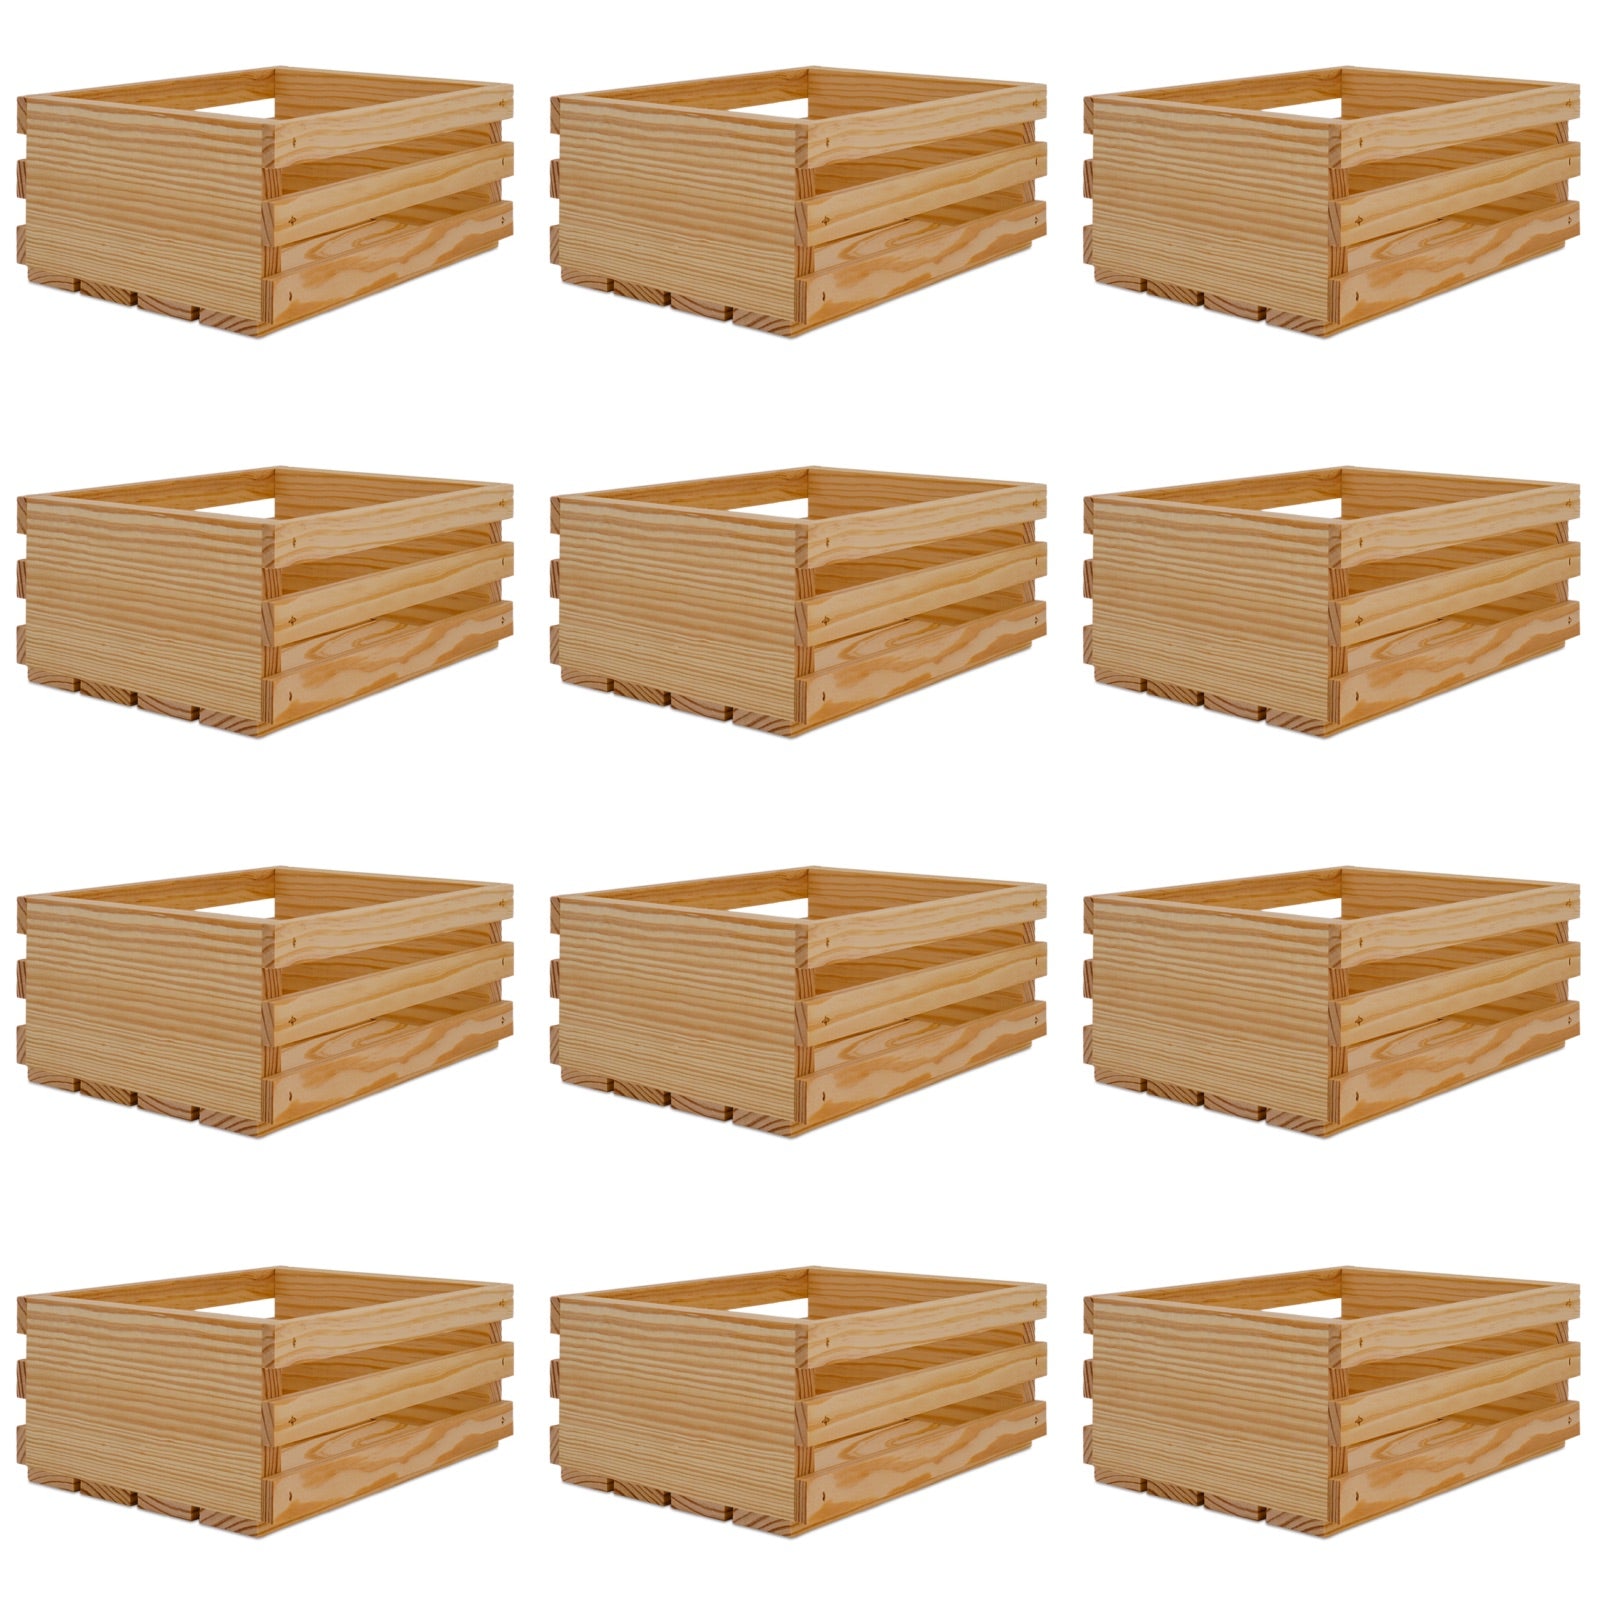 12 Small wooden crates 10x8x4.5, 6-SS-10-8-4.5-NX-NW-NL, 12-SS-10-8-4.5-NX-NW-NL, 24-SS-10-8-4.5-NX-NW-NL, 48-SS-10-8-4.5-NX-NW-NL, 96-SS-10-8-4.5-NX-NW-NL